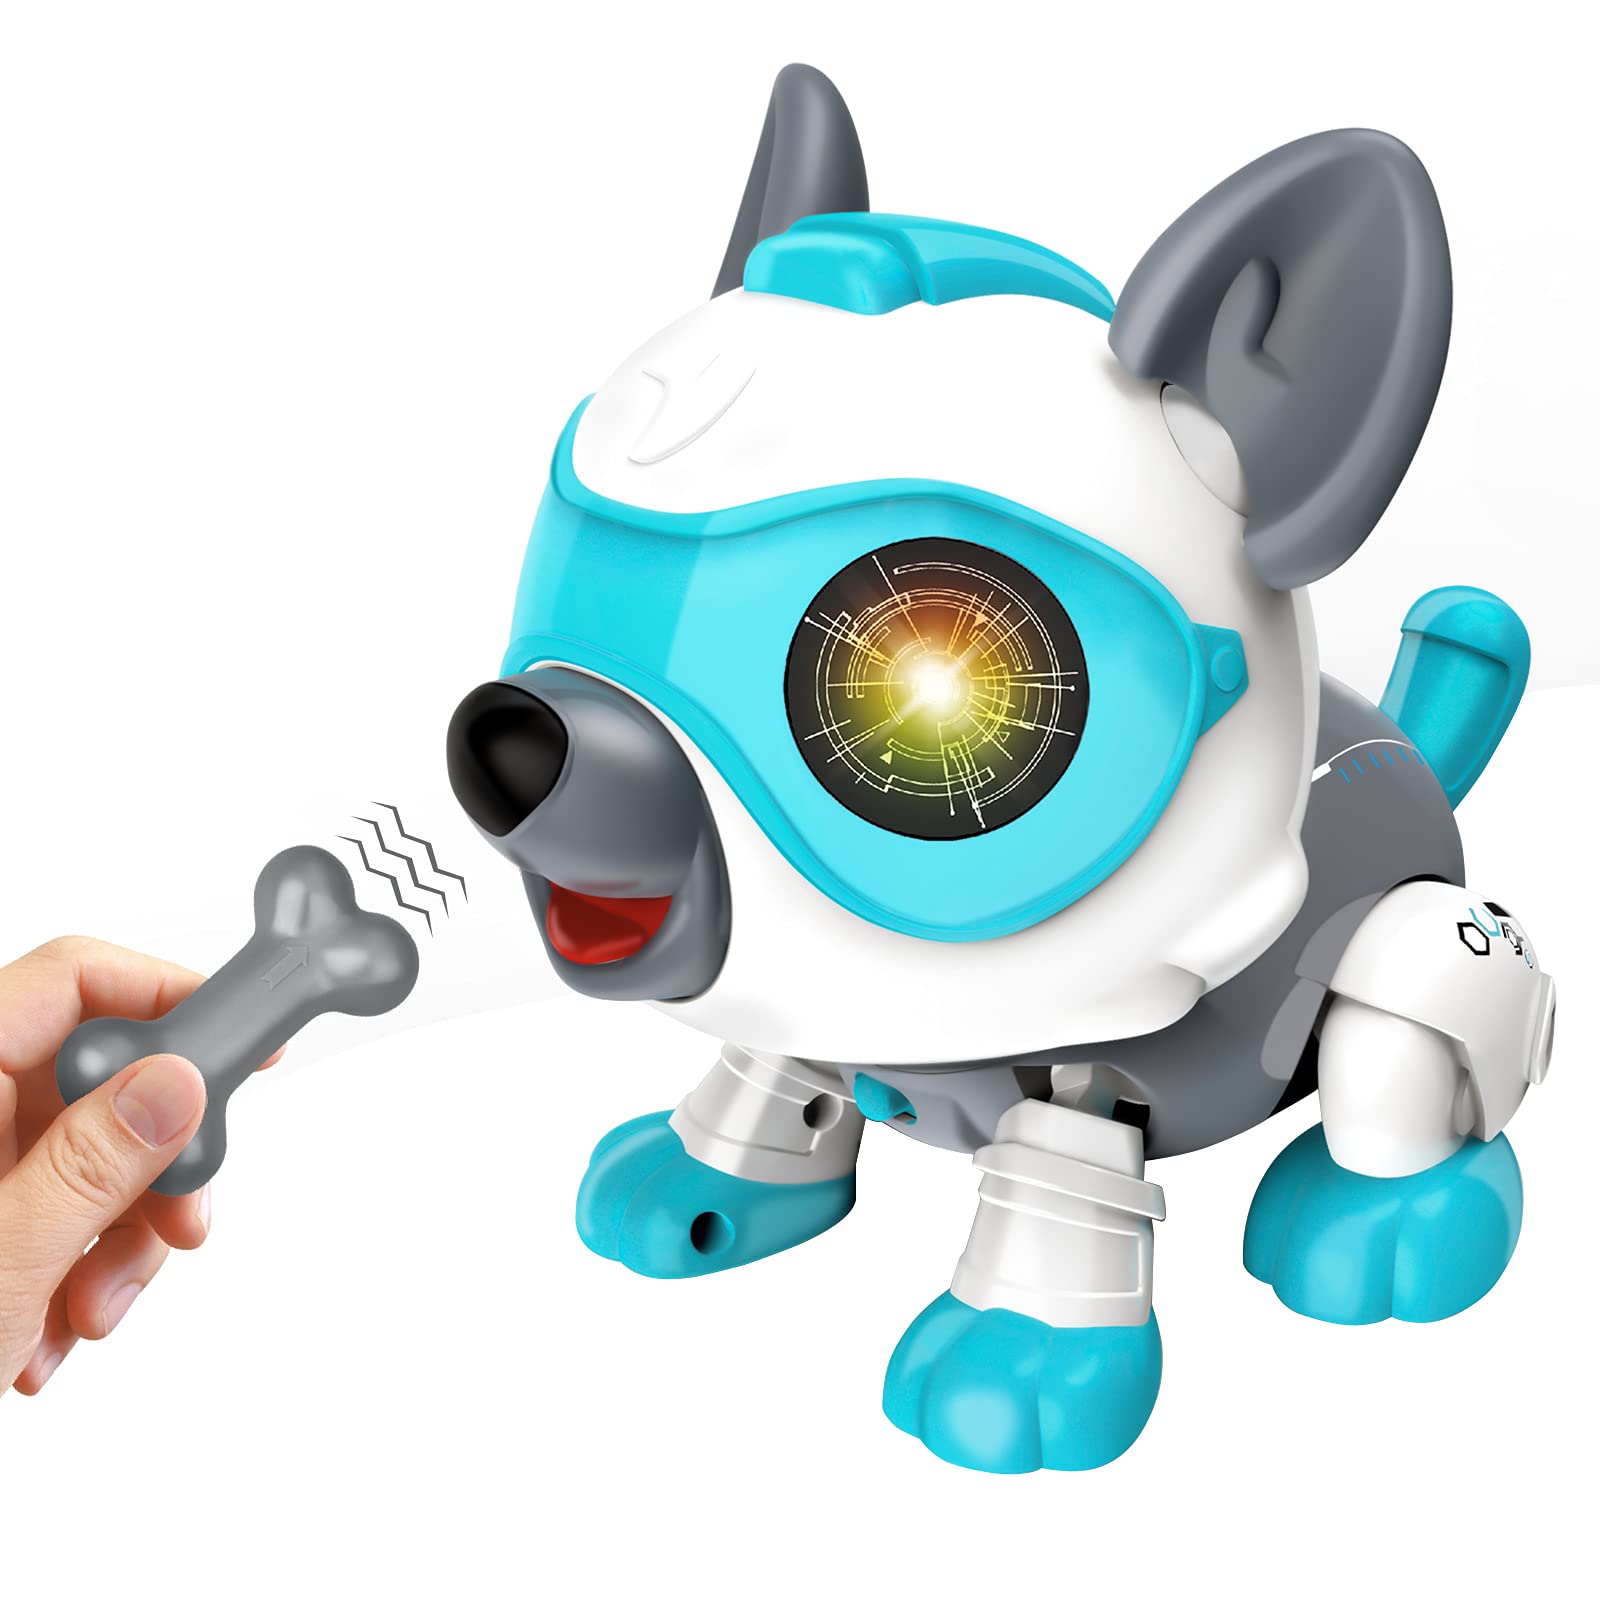 Robot Dog Toys for Kids, DIY STEM Toys for 3 4 5 6 7 8 Year Old Girls Boys, Interactive Electronic Puppy Pet with Touch Control, Educational Toys for Kids 5-7, Christmas Birthday Gifts for Kids